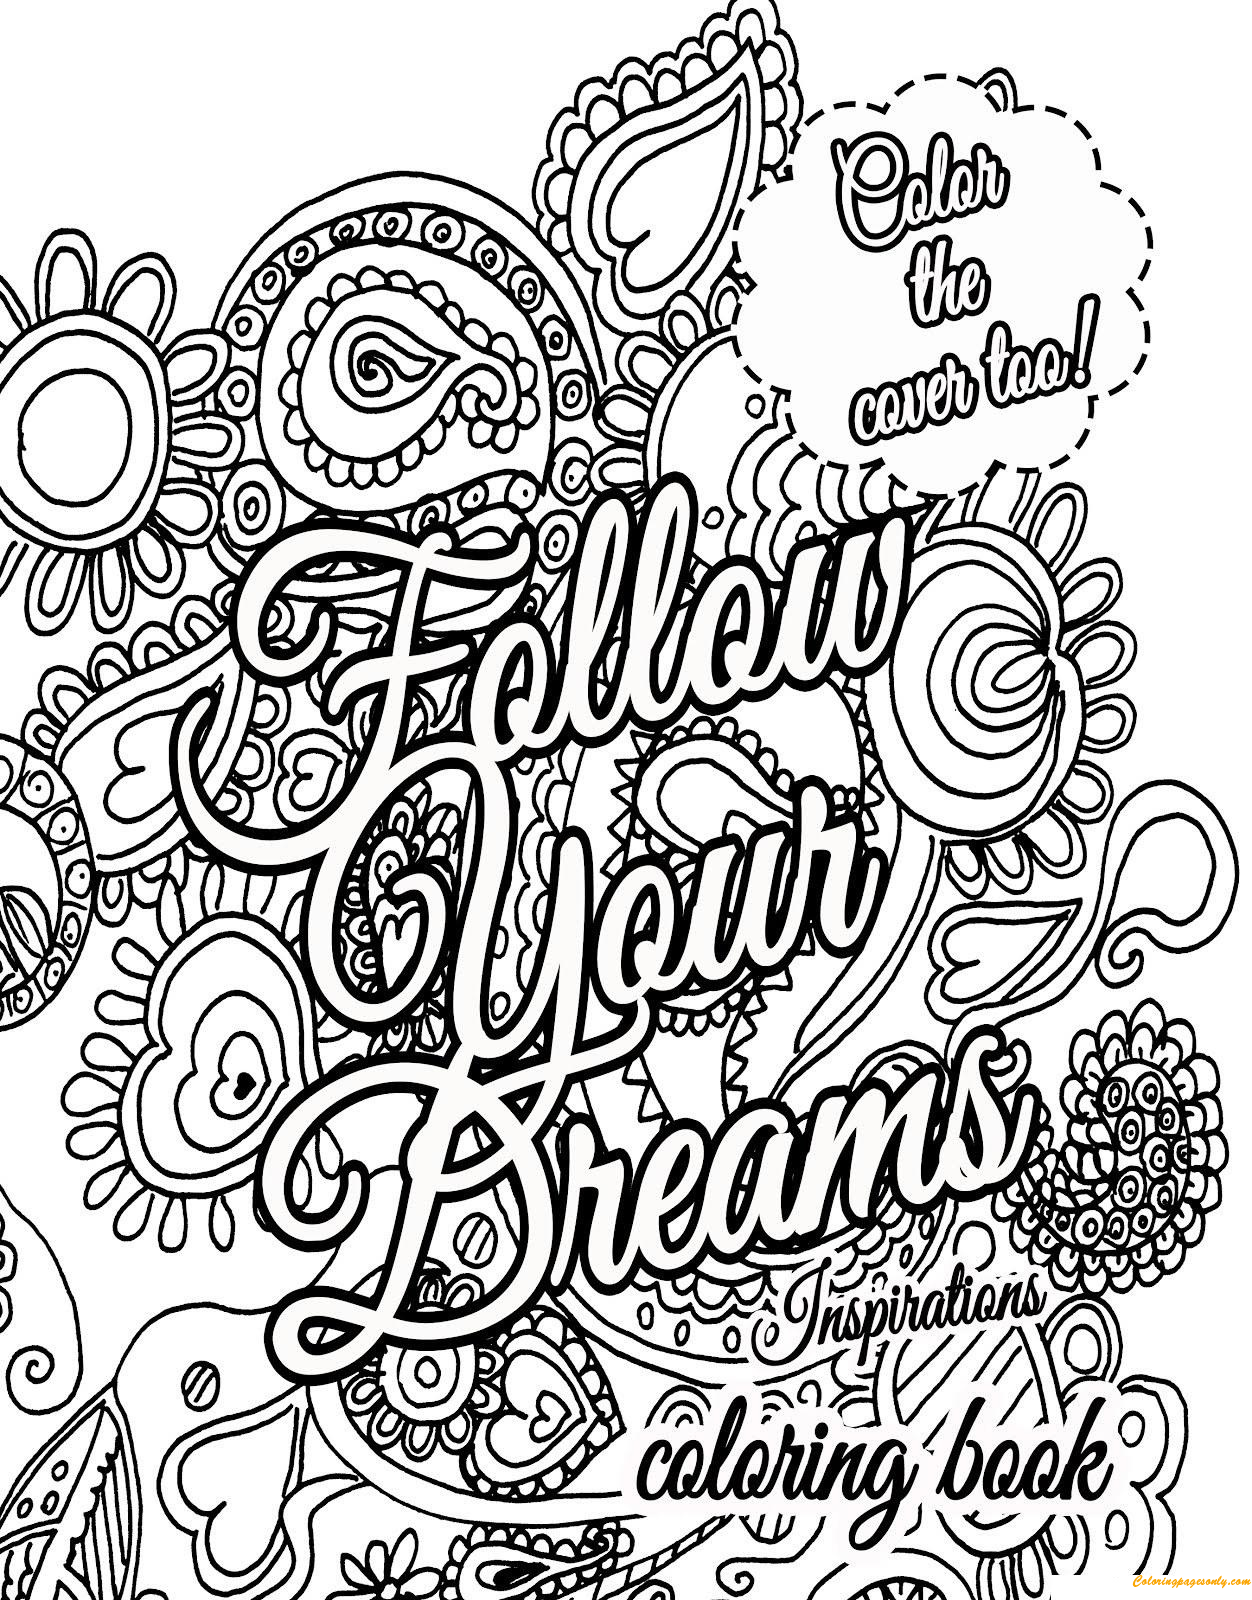 Dreams Quotes Coloring Page - Free Coloring Pages Online